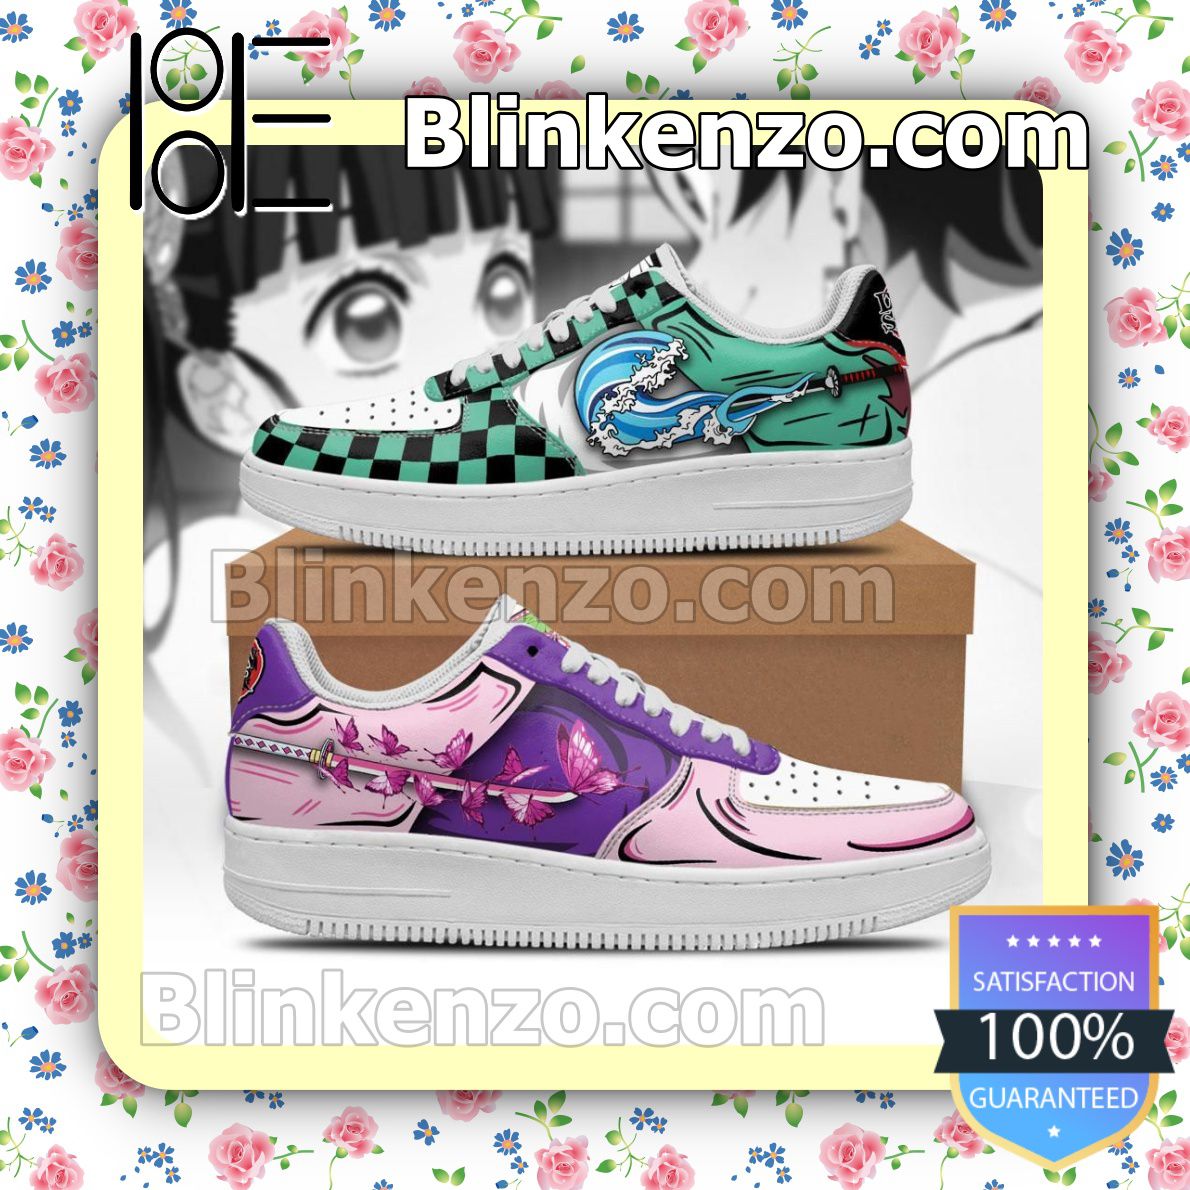 The cheapest Kanao and Tanjiro Demon Slayer Anime Nike Air Force Sneakers